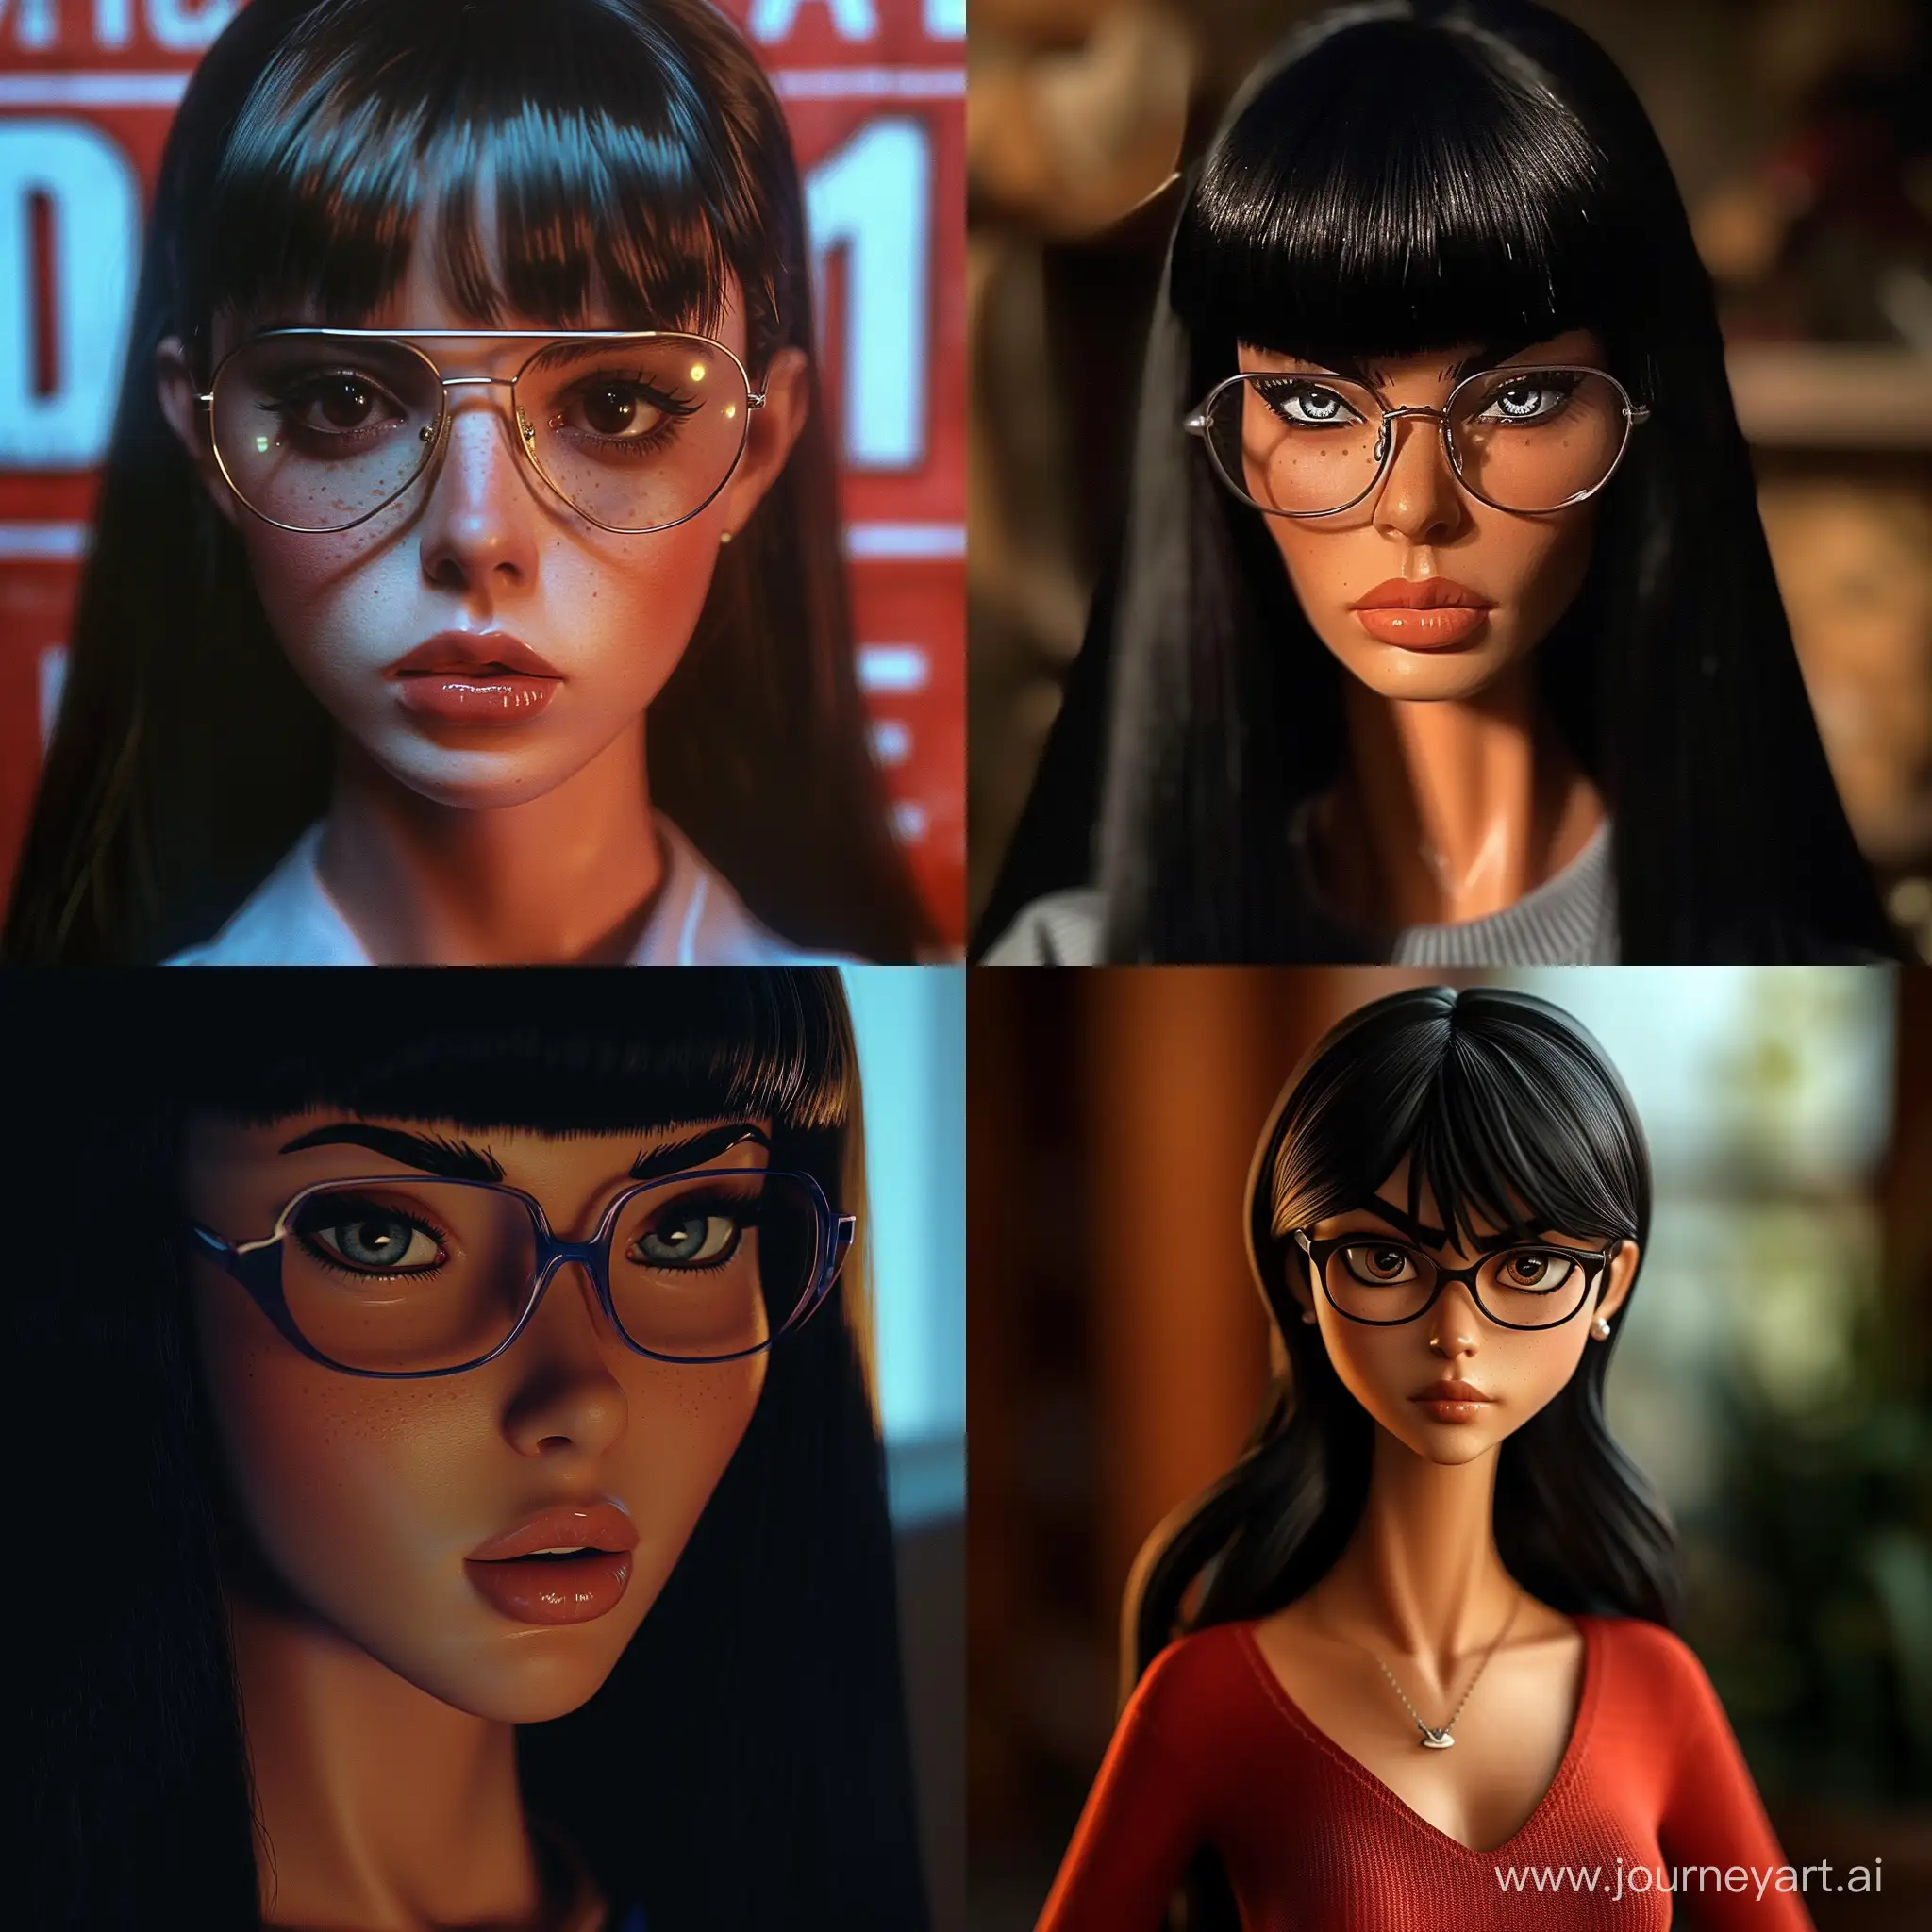 extremely super photo real Daria Morgendorffer the main character of the animated series Daria, serious expression, very excites sultry look, so hot girl, beautiful charismatic girl, so hot shot, a woman wearing eye glasses, gorgeous figure, interesting shapes, life-size figures